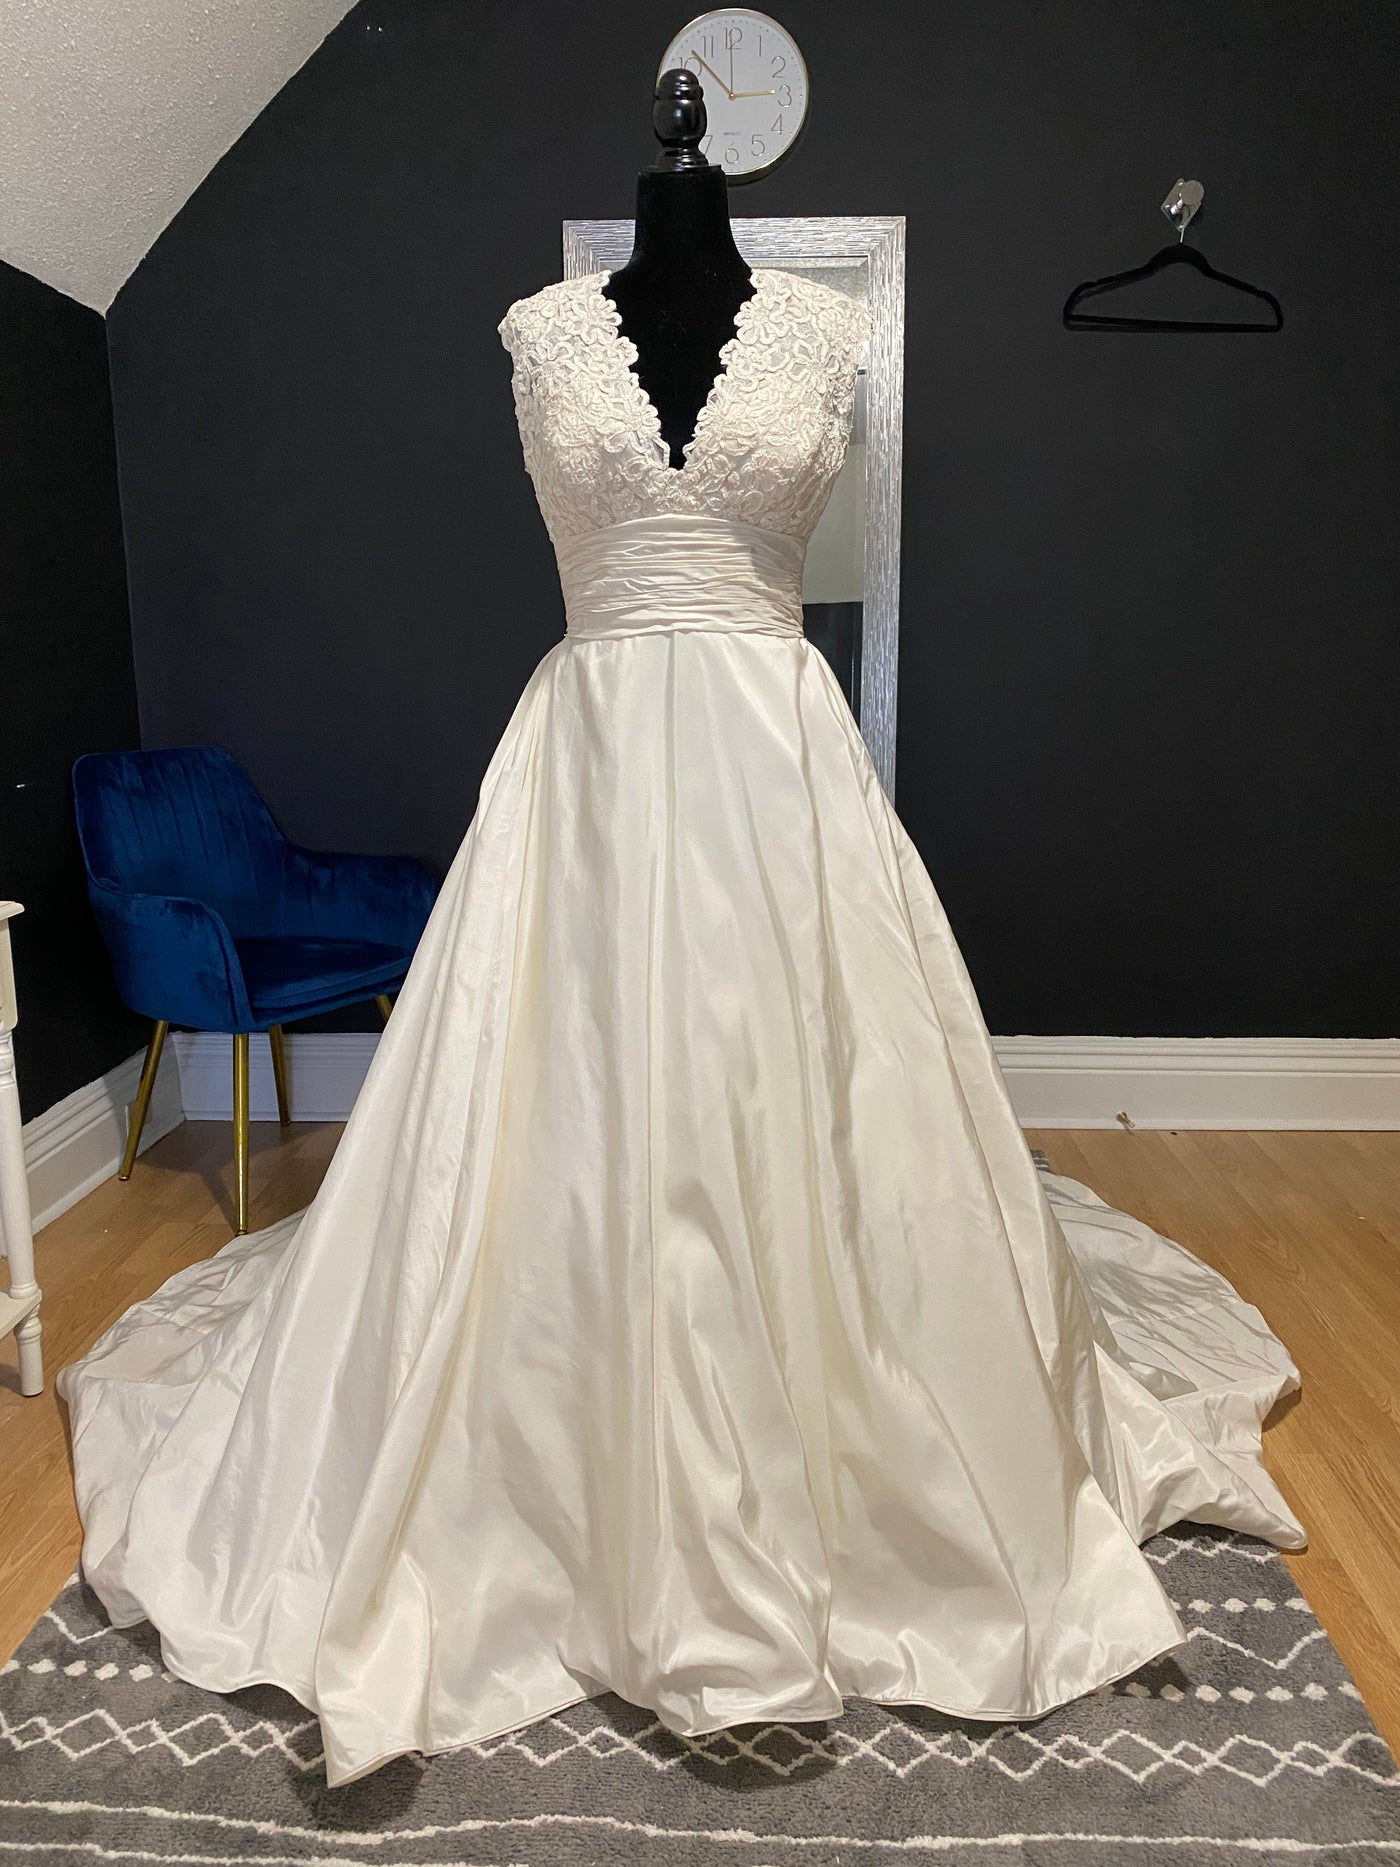 Consignment Gowns | Dearly Consignment Bridal - Bronte ML19009 Madi Lane -  Consignment | Dearly Consignment Bridal